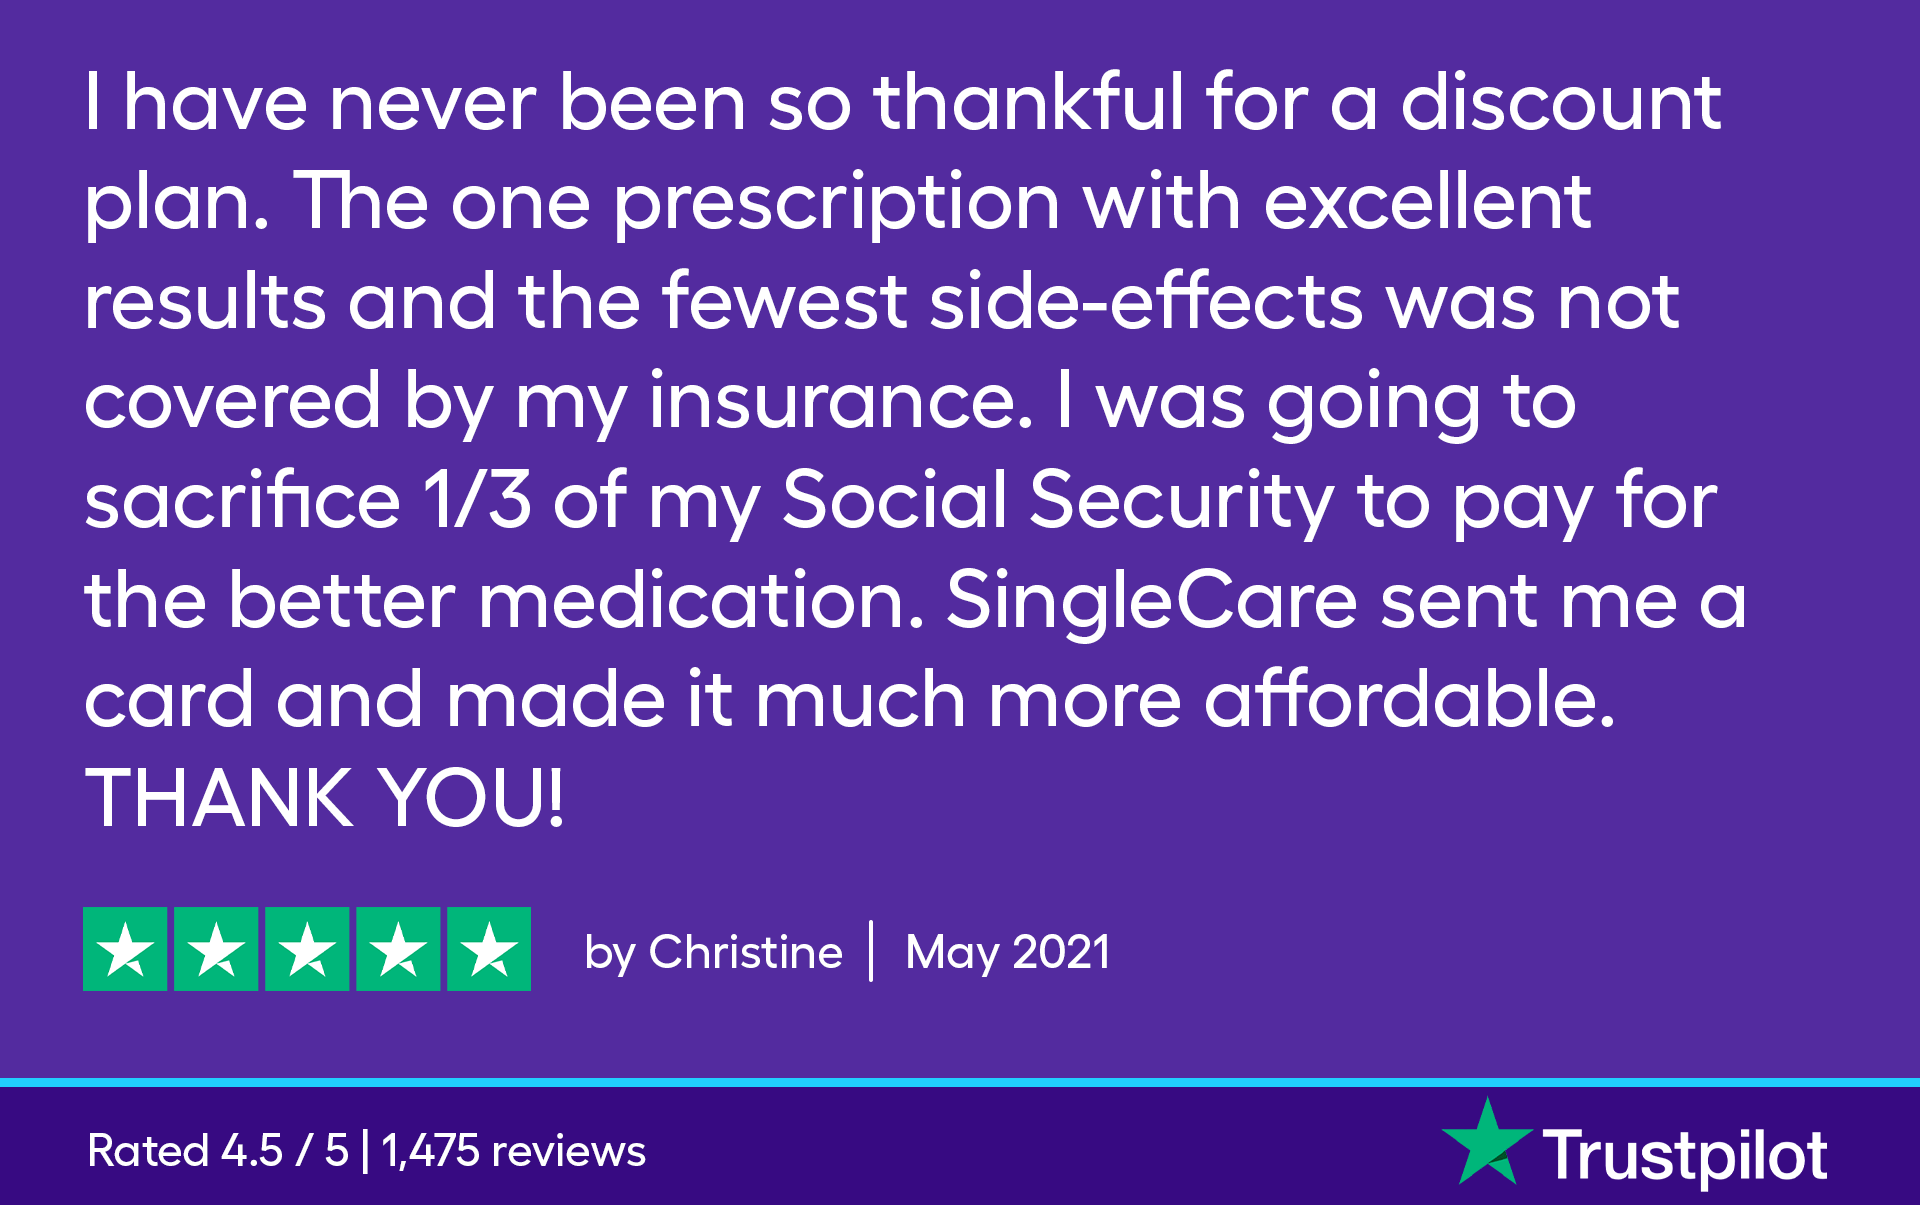 I have never been so thankful for a discount plan. The one prescription with excellent results and the fewest side-effects was not covered by my insurance. I was going to sacrifice 1/3 of my social security to pay for a better medication. SingleCare sent me a card and made it much more affordable. THANK YOU!